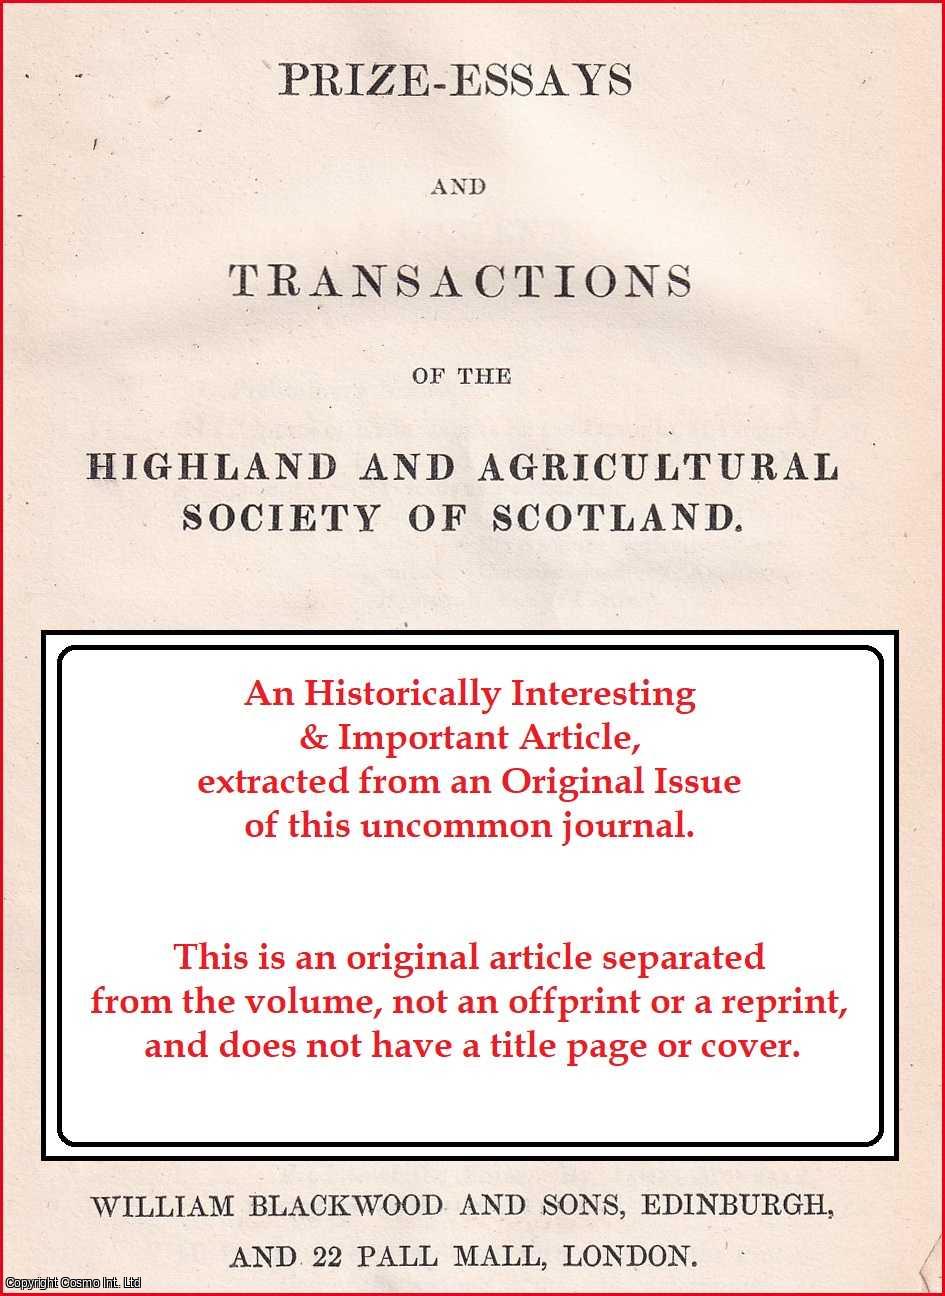 Mr. Peter Thomson, Hangingside, Linlithgowshire. - The Comparative Efficiency of Draining Land in the Direction of, or at an Angle with, the Slope. An uncommon original article from the Prize Essays and Transactions of the Highland Society of Scotland, 1841.